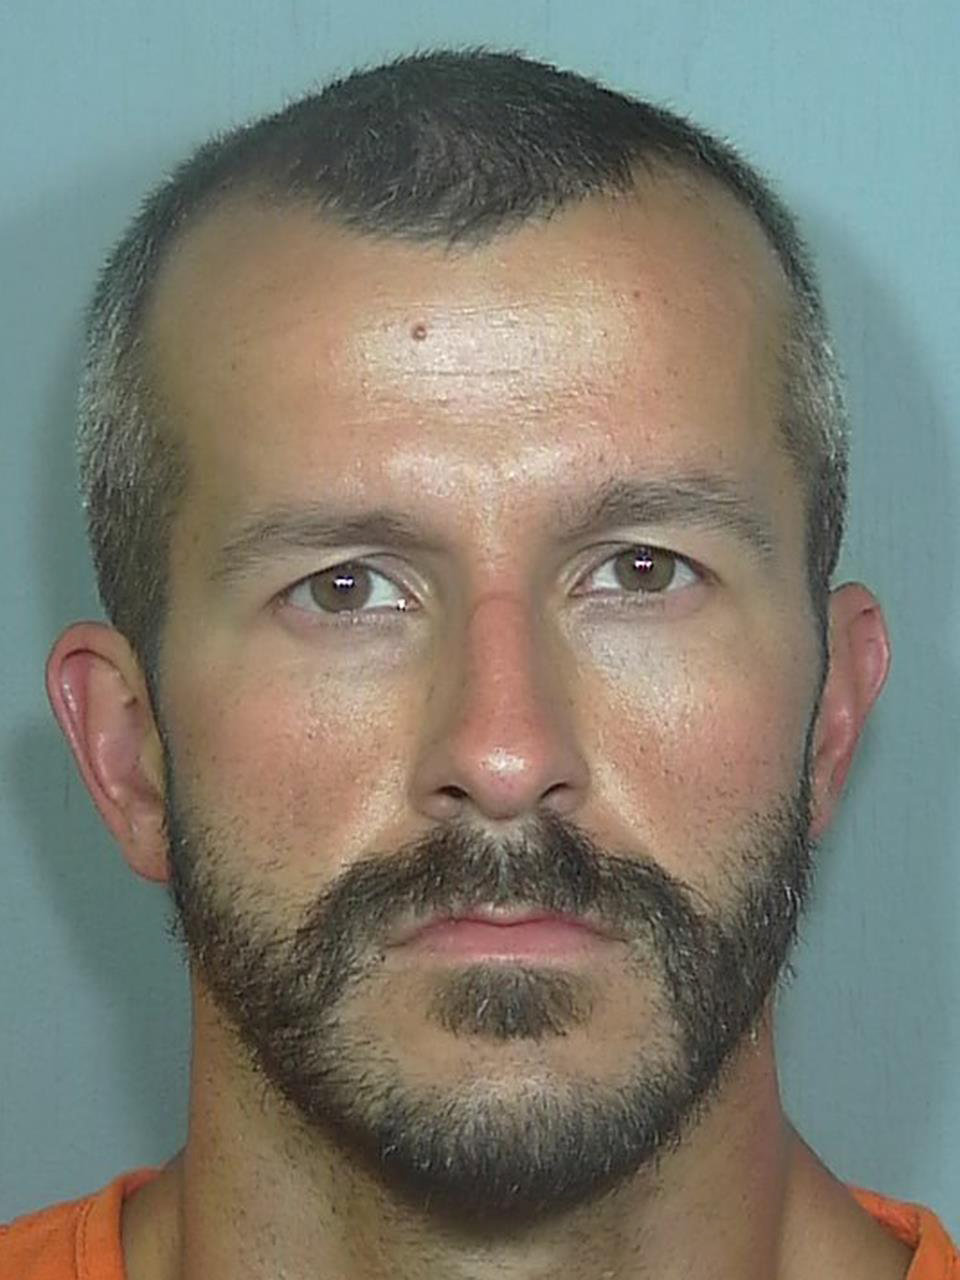 Christopher Watts, 33, arrested on suspicion of murdering his pregnant wife and two young daughters, in Frederick, Colorado, U.S., is shown in this handout photo provided on August 16, 2018. (Weld County Sheriff's Office/Handout via REUTERS)